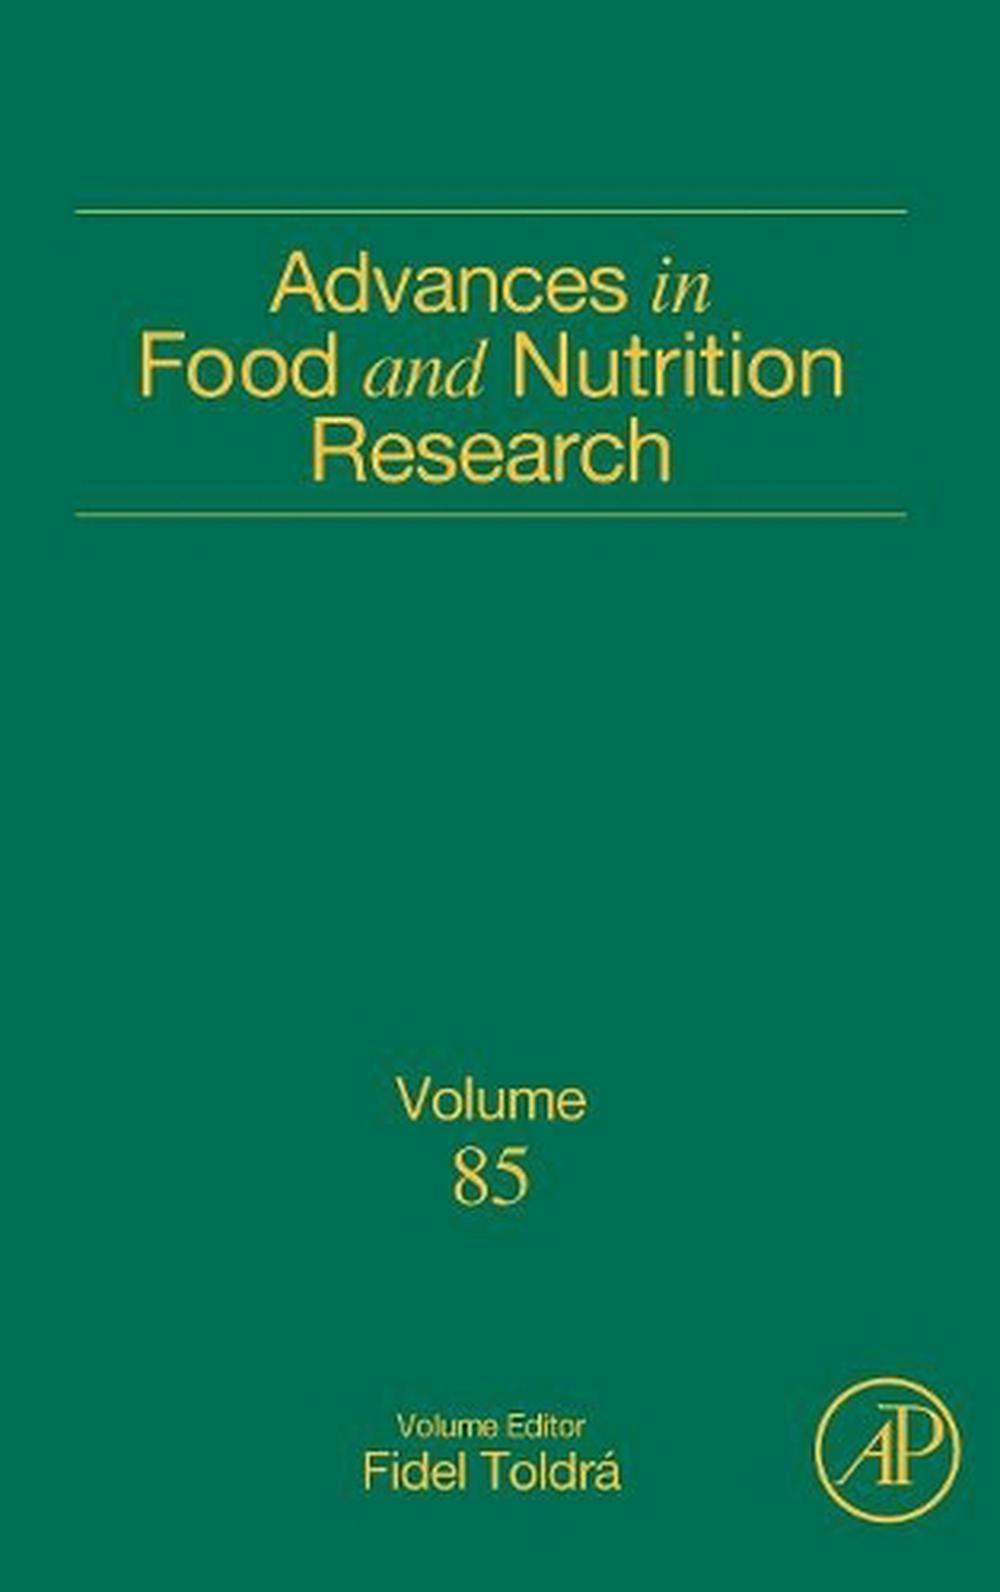 food related research articles